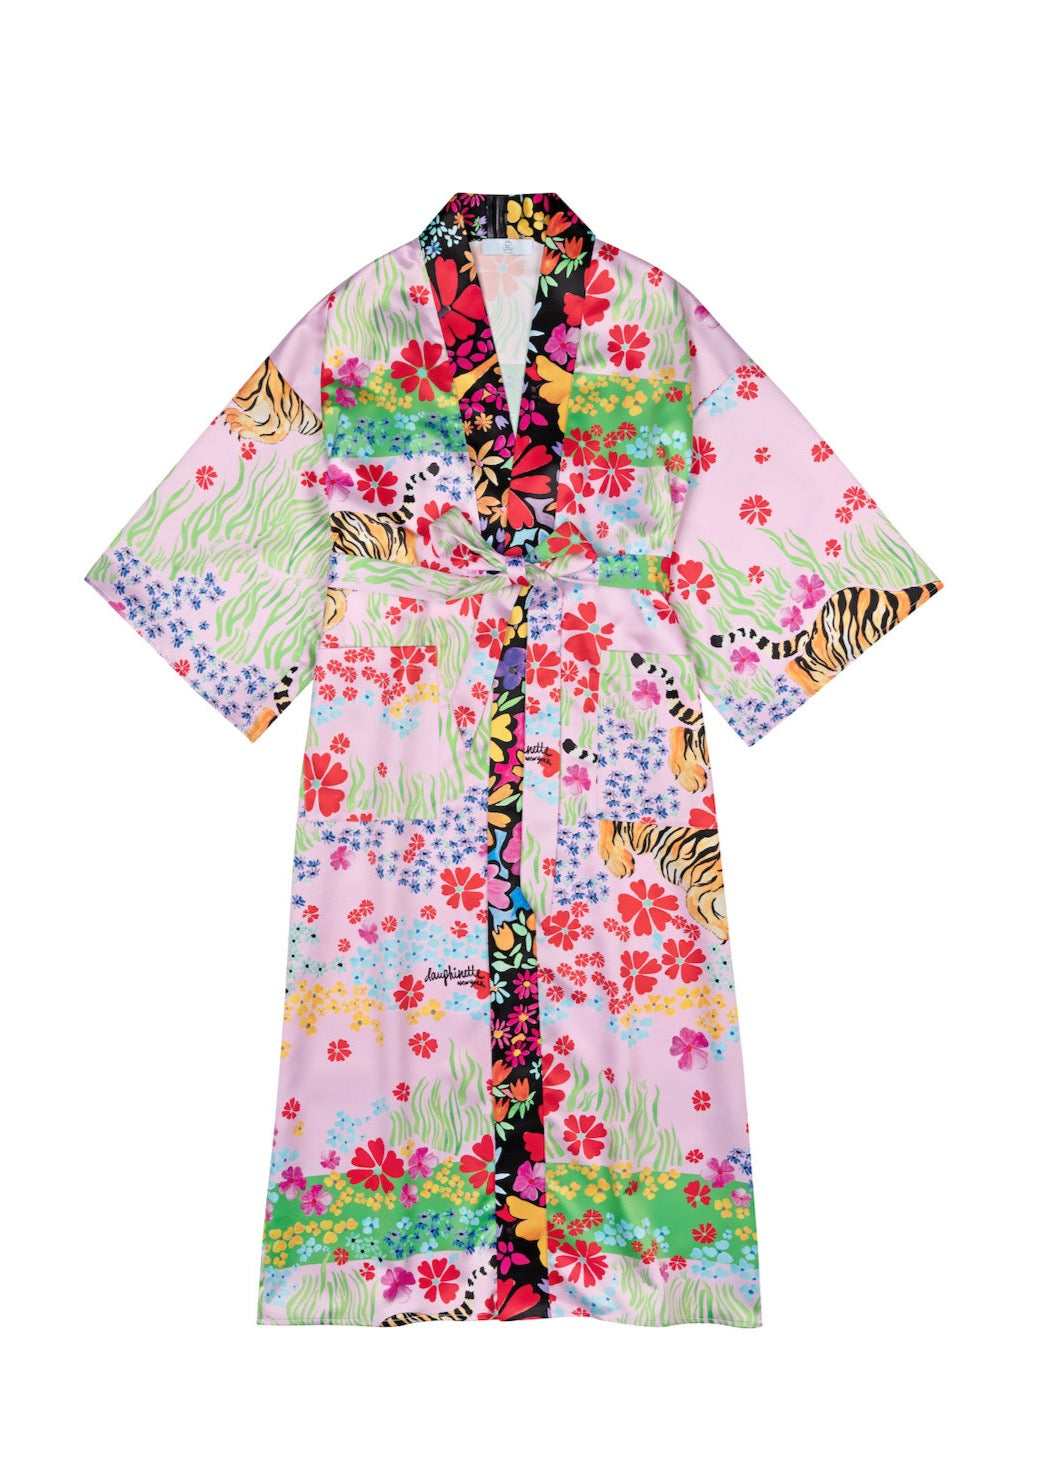 The robe that does it all, our R23 Oracle Robe features both Tiger Blooms and Wonderland Flora prints for a joyful, sartorial eruption of color.